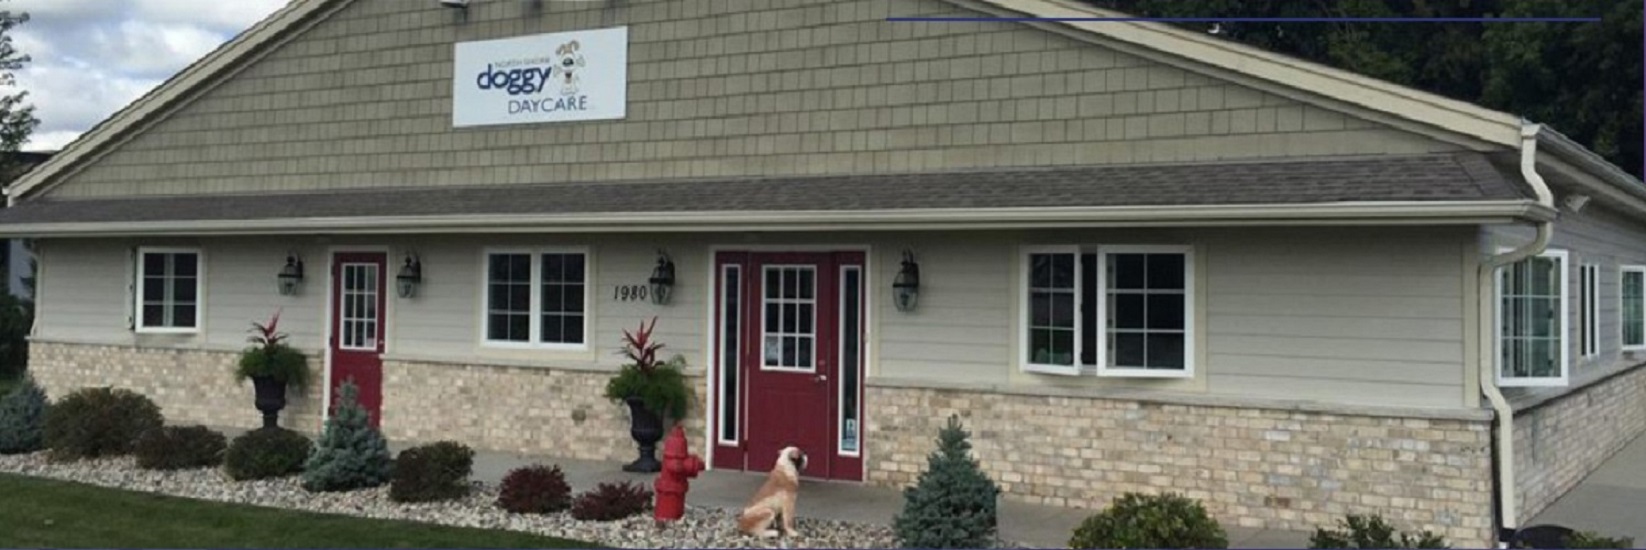 NSDD- North Shore Doggy Daycare - Dogs Are Special Facility  